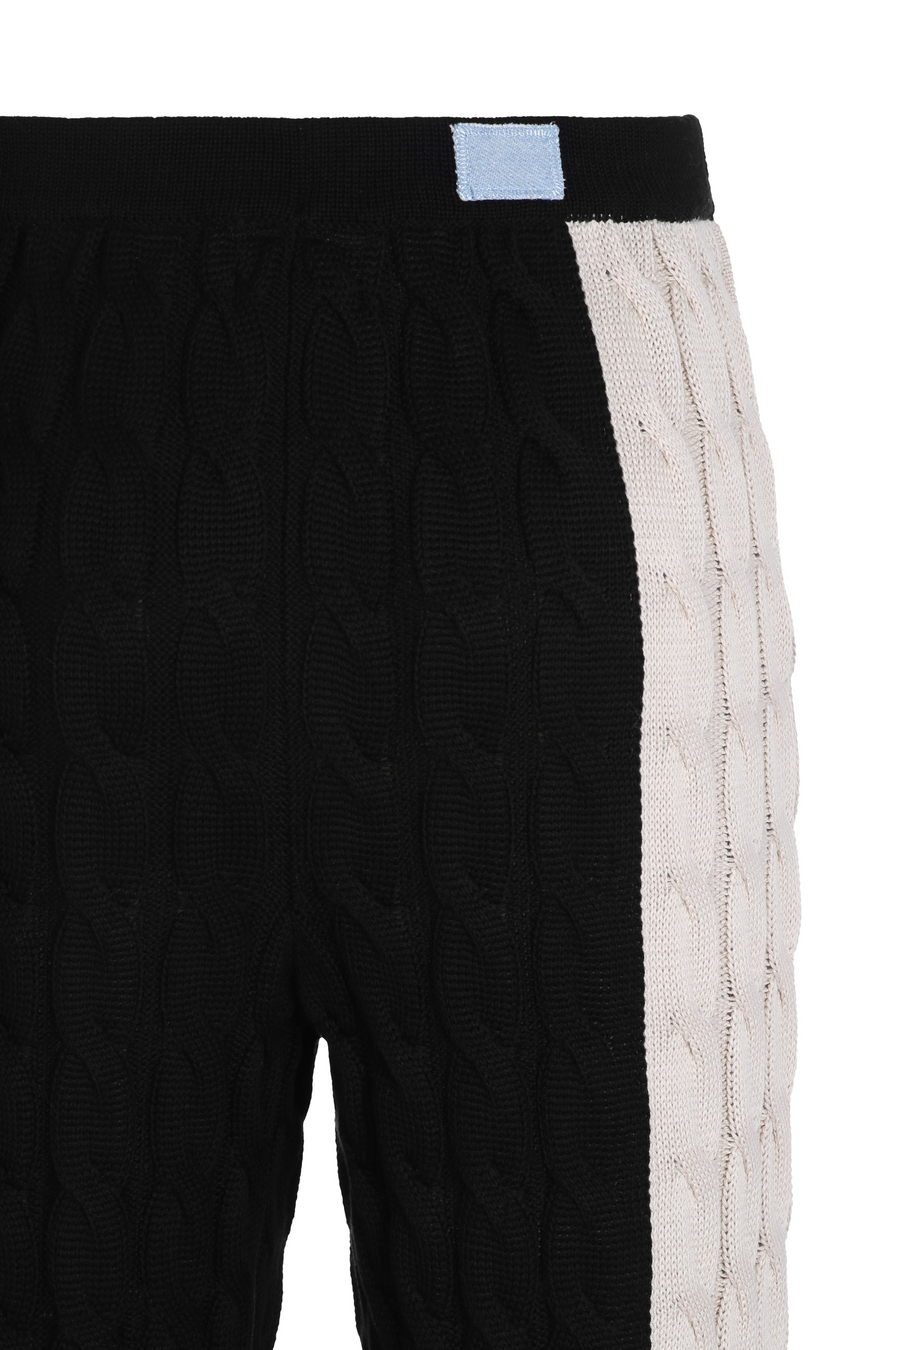 The Two-Toned Cable Knit Pants